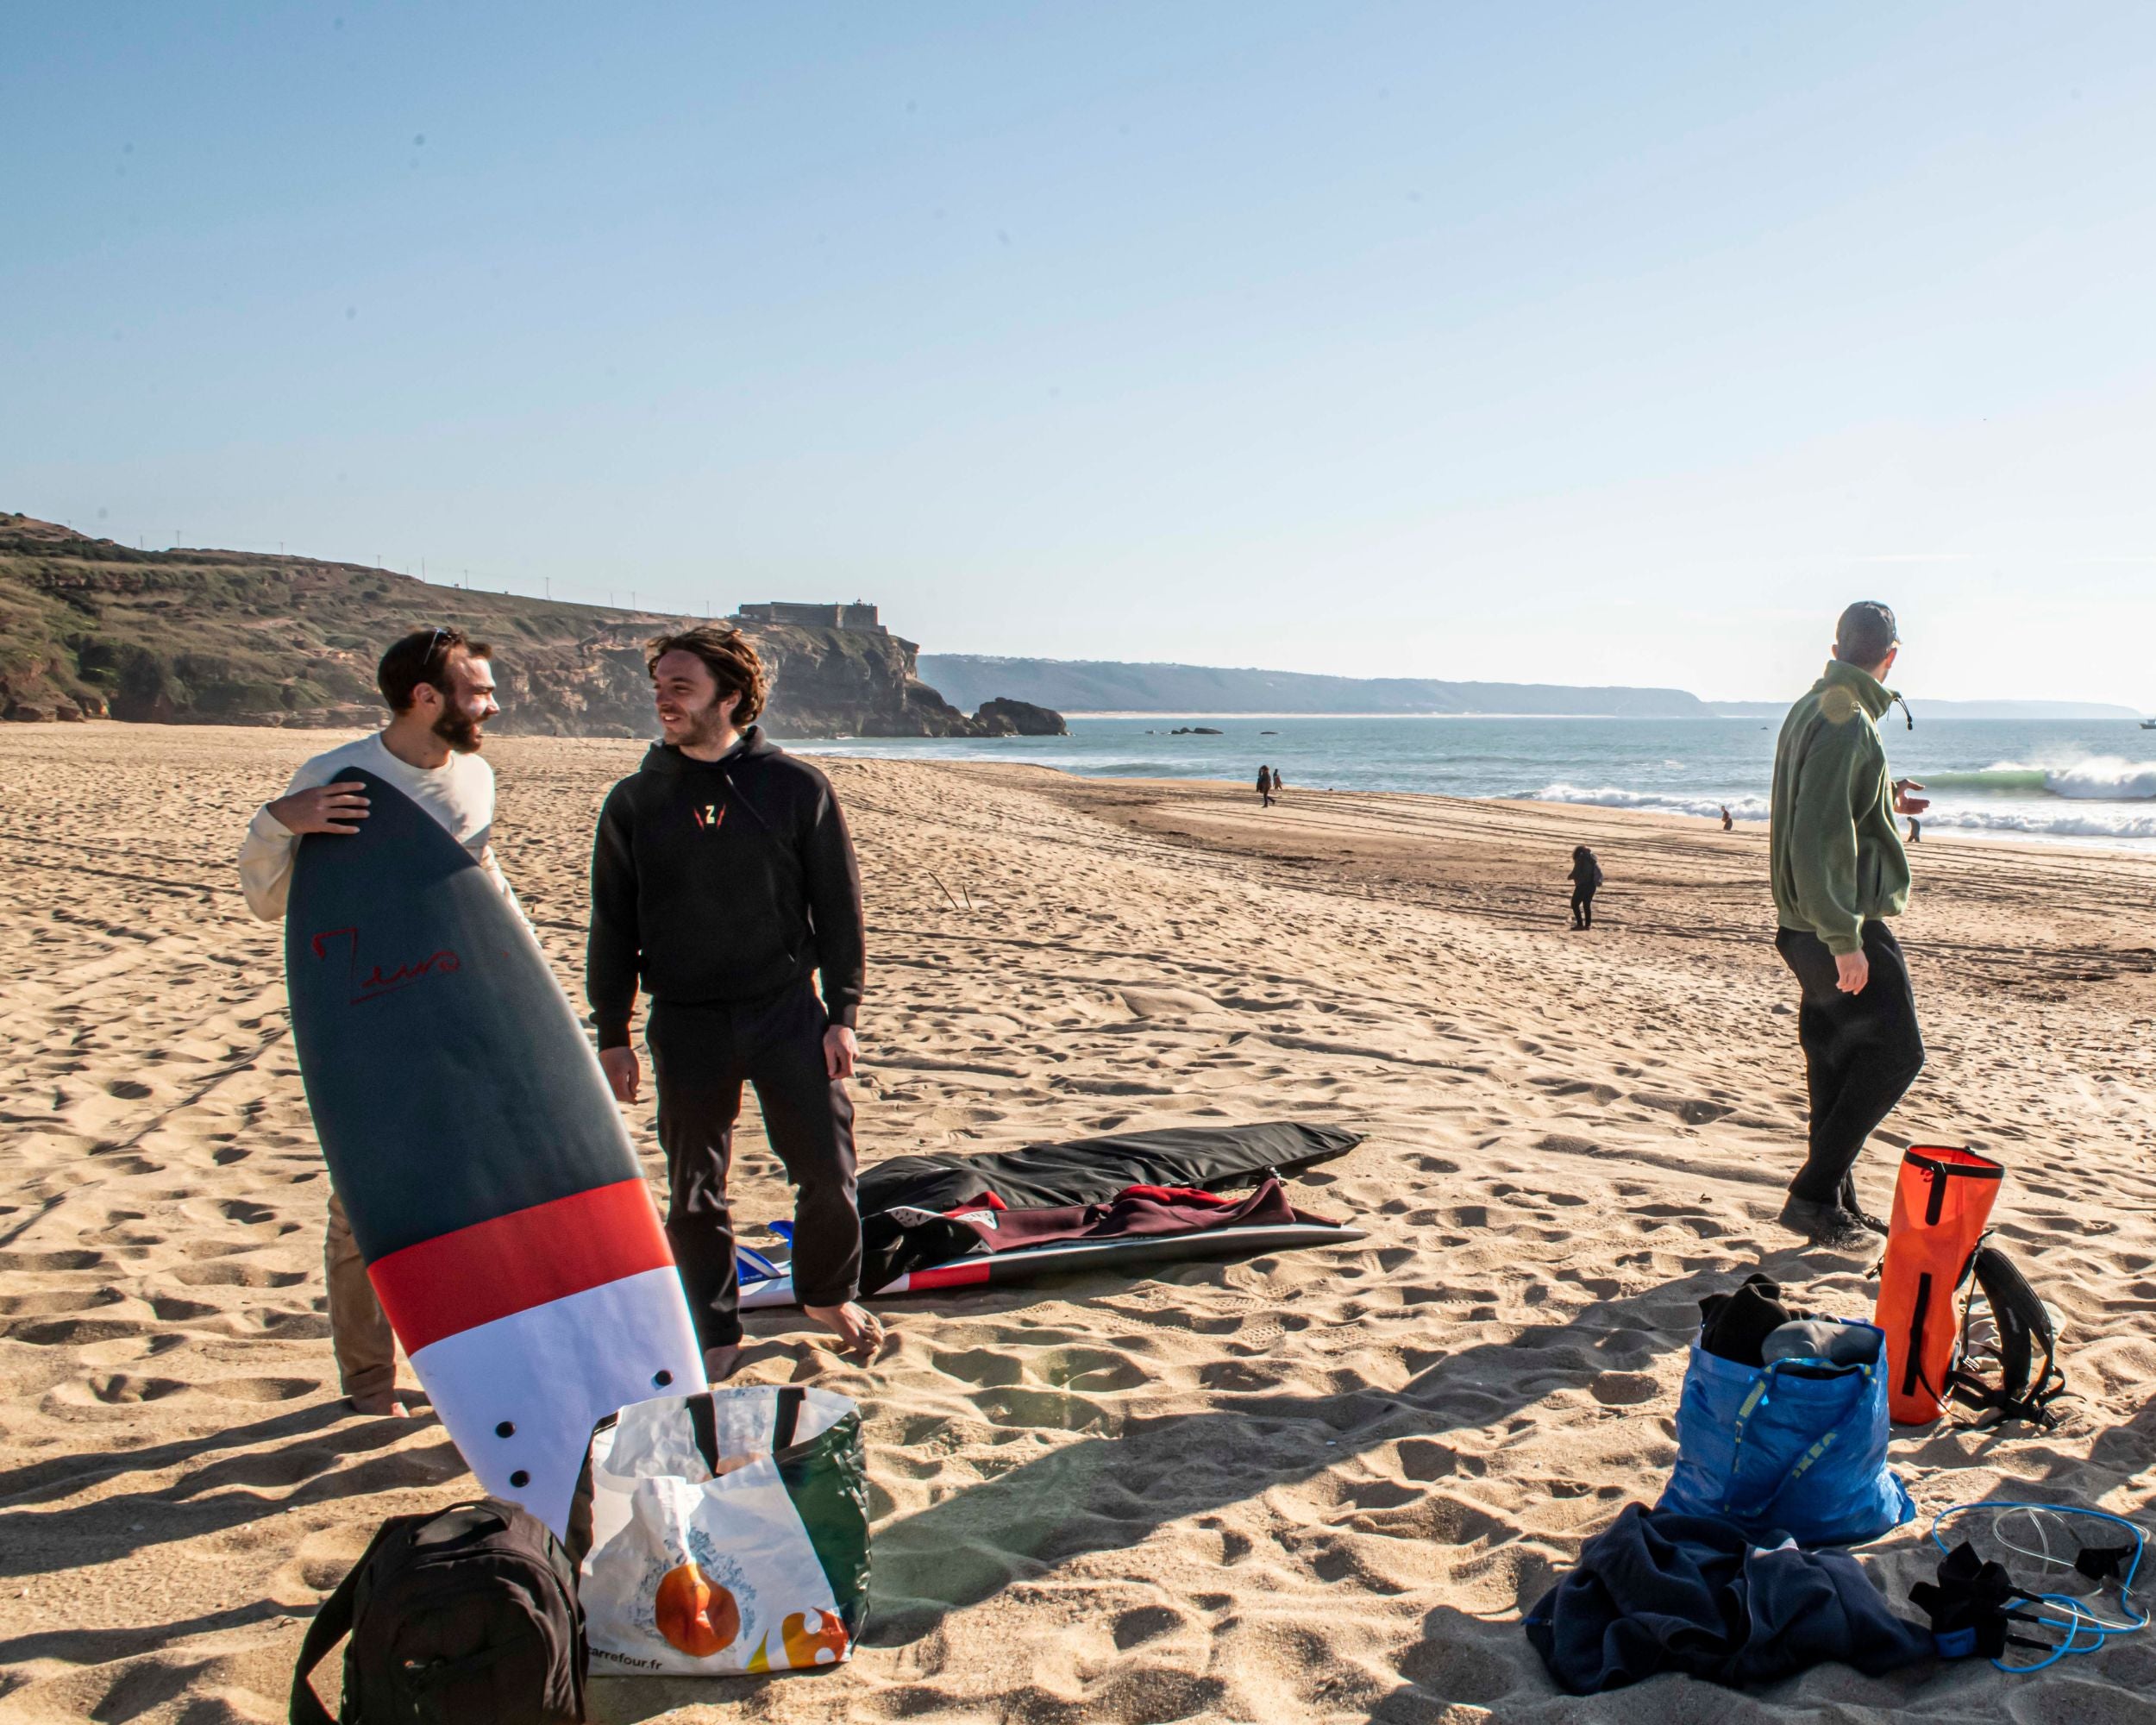 How to properly prepare your surf trip - advice from Zeus to leave peacefully